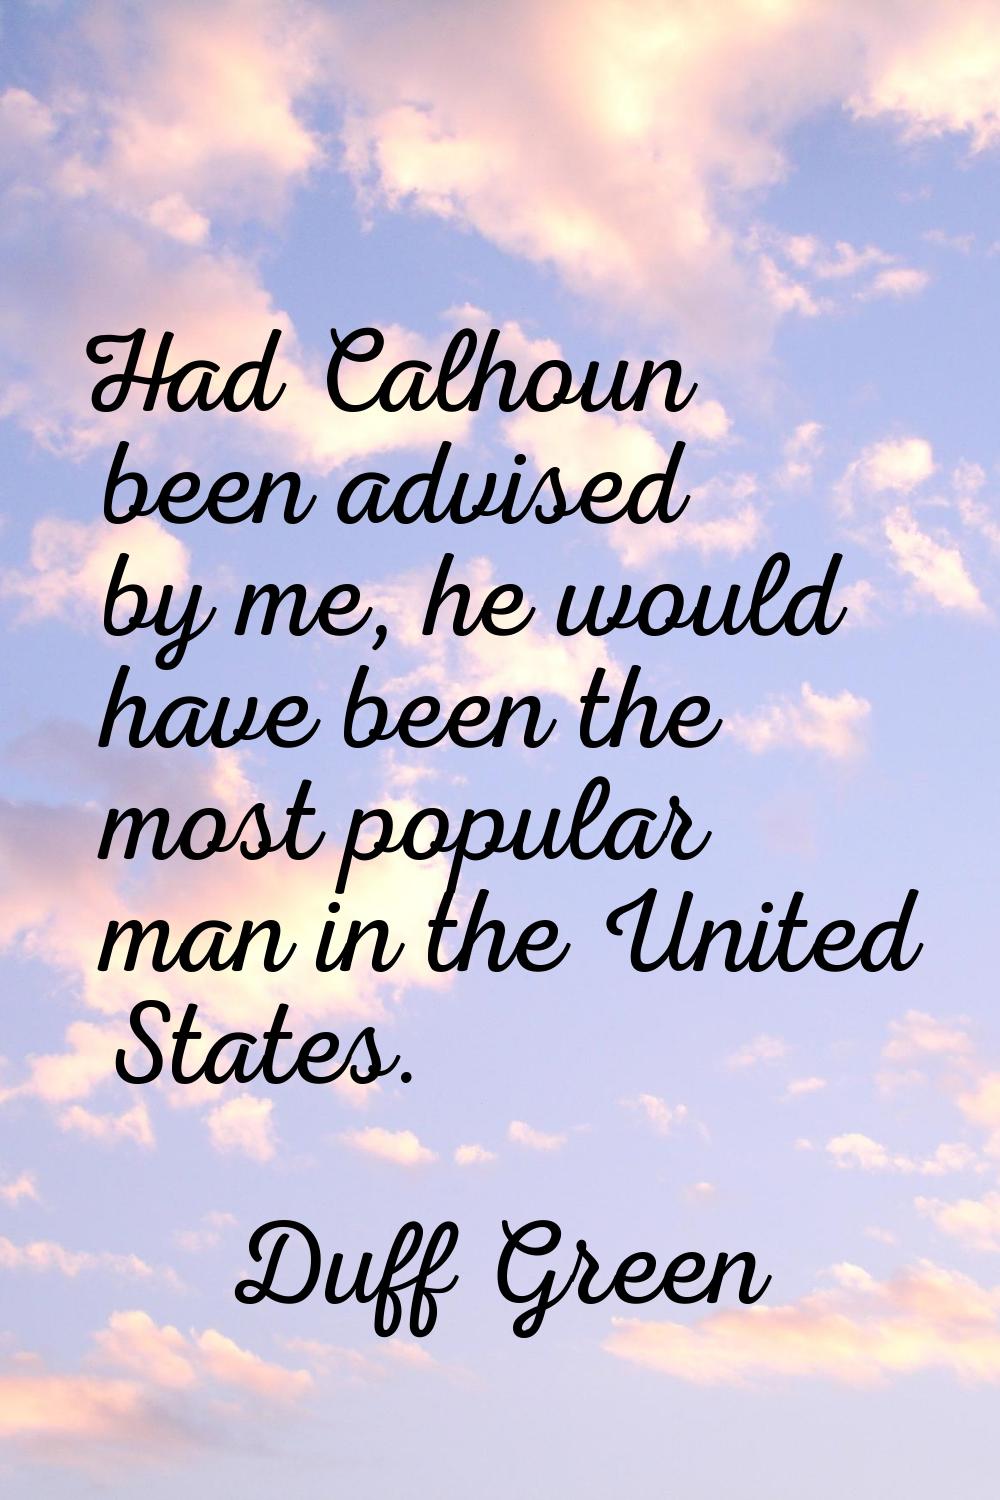 Had Calhoun been advised by me, he would have been the most popular man in the United States.